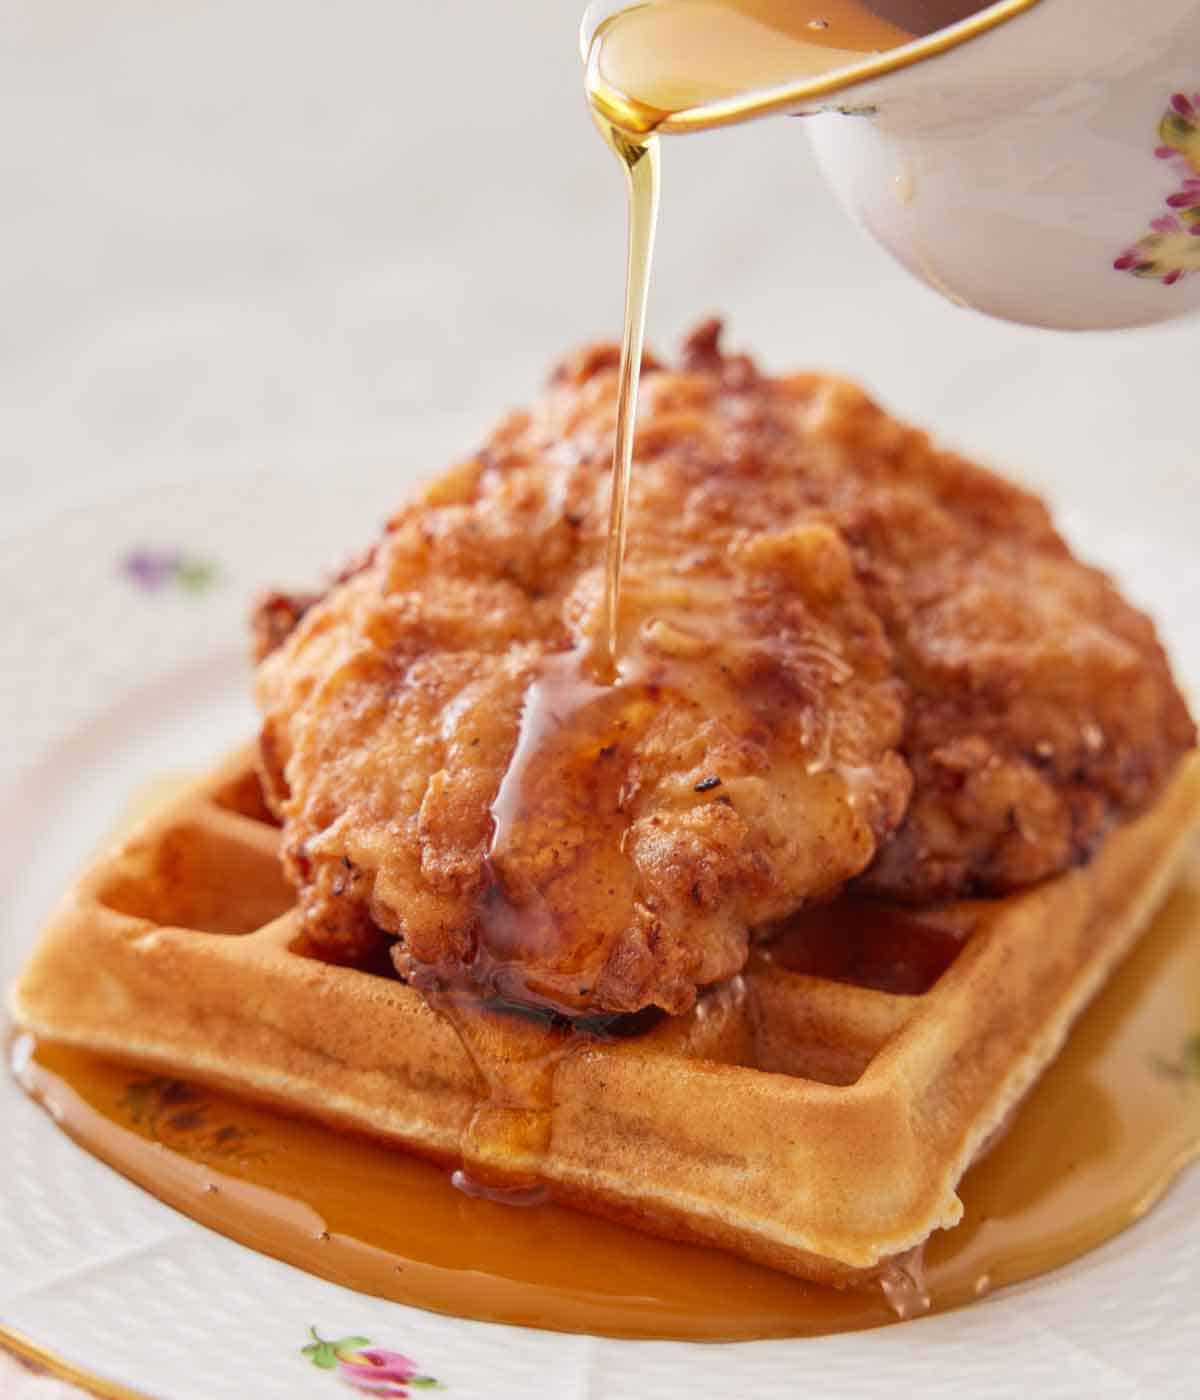 Maple syrup drizzled over a plate of chicken and waffles.